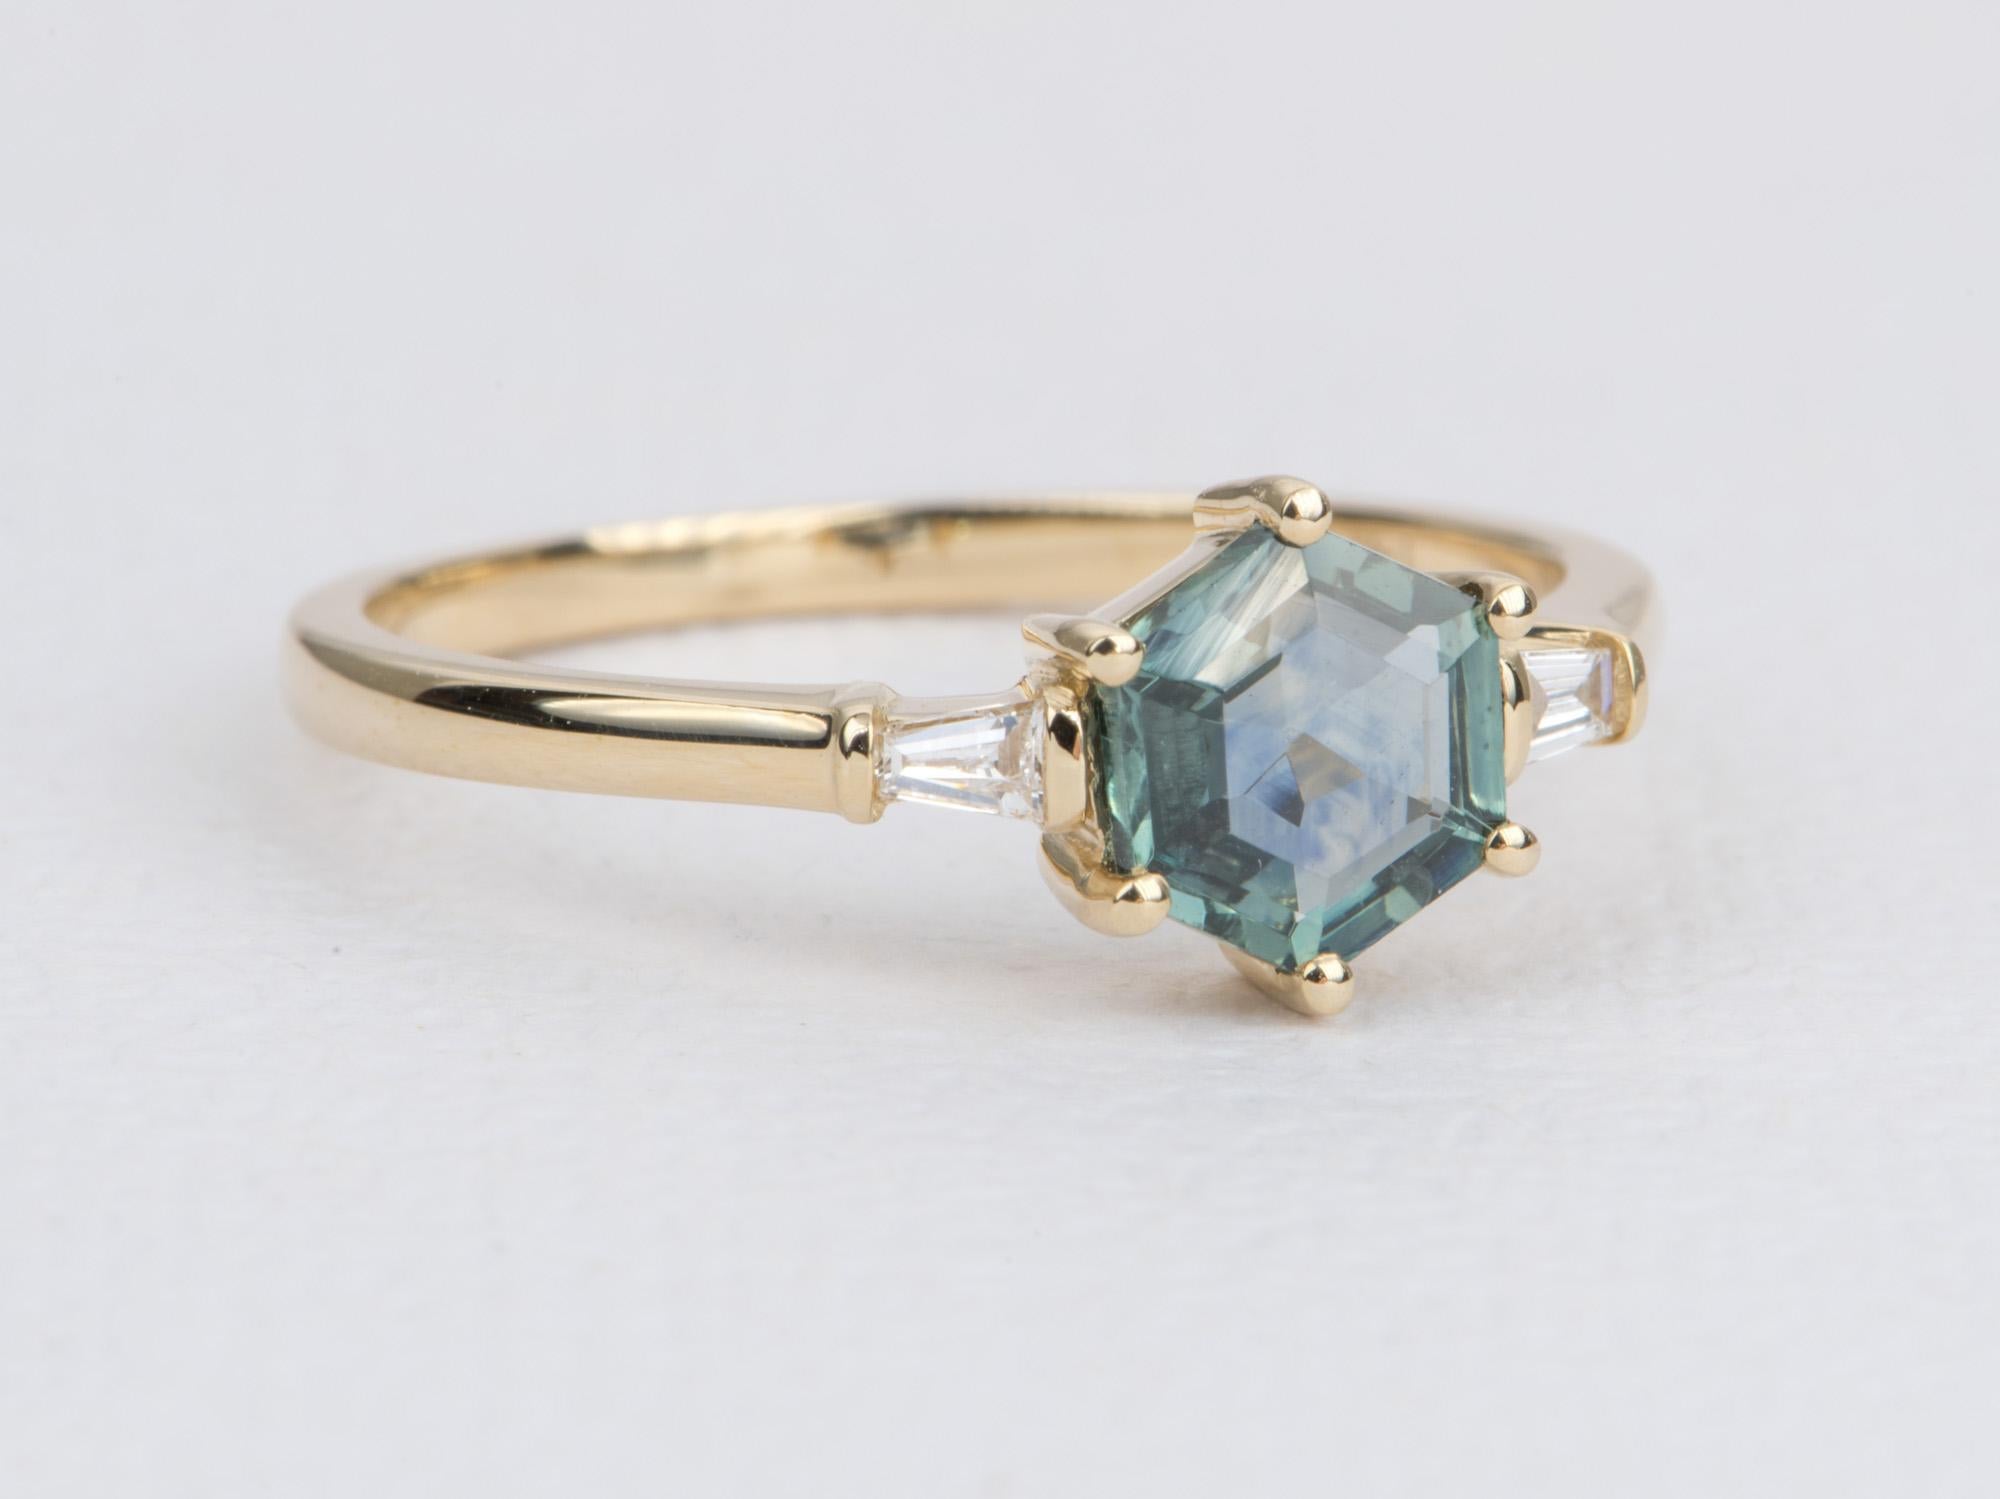 ♥  This modern ring has a hexagon-shaped Montana sapphire in the center, flanked by tapered baguette diamond on each side.  

♥  US Size 8 (Free resizing)
♥  Band width: 1.7mm
♥  Material: 14K yellow gold
♥  Gemstones: Montana sapphire, 0.99ct;